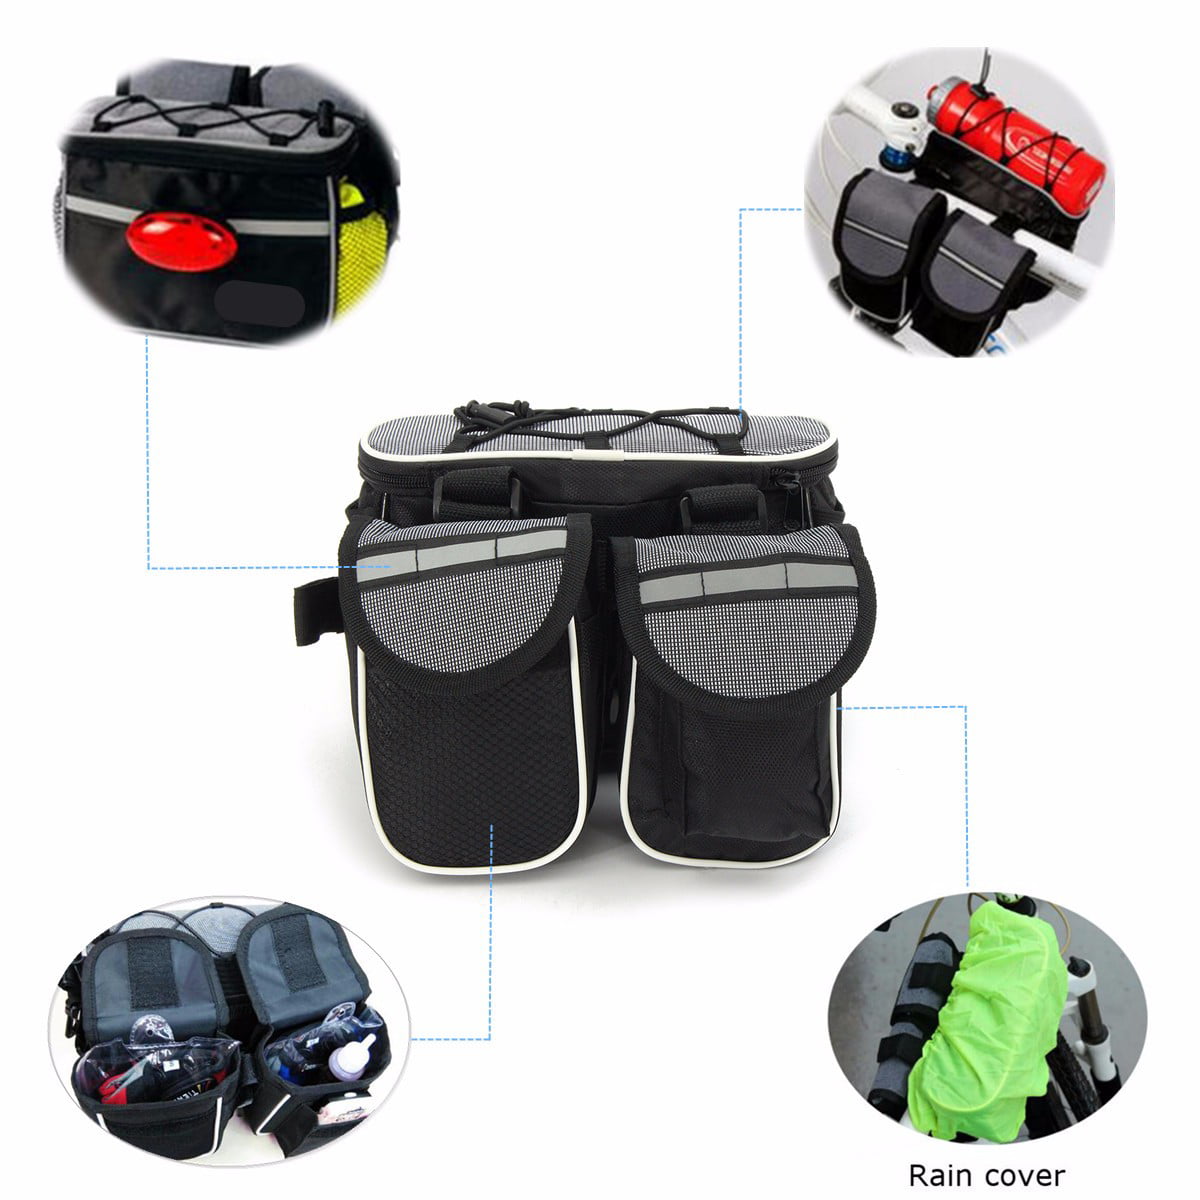 Bike Handlebar Bag Bicycle Frame Front Tube Waterproof Storage Foldable Basket Pouch Bag Large Capacity with Mesh Pocket Rain Cover Universal for Most Road Bikes Professional Cycling Accessories